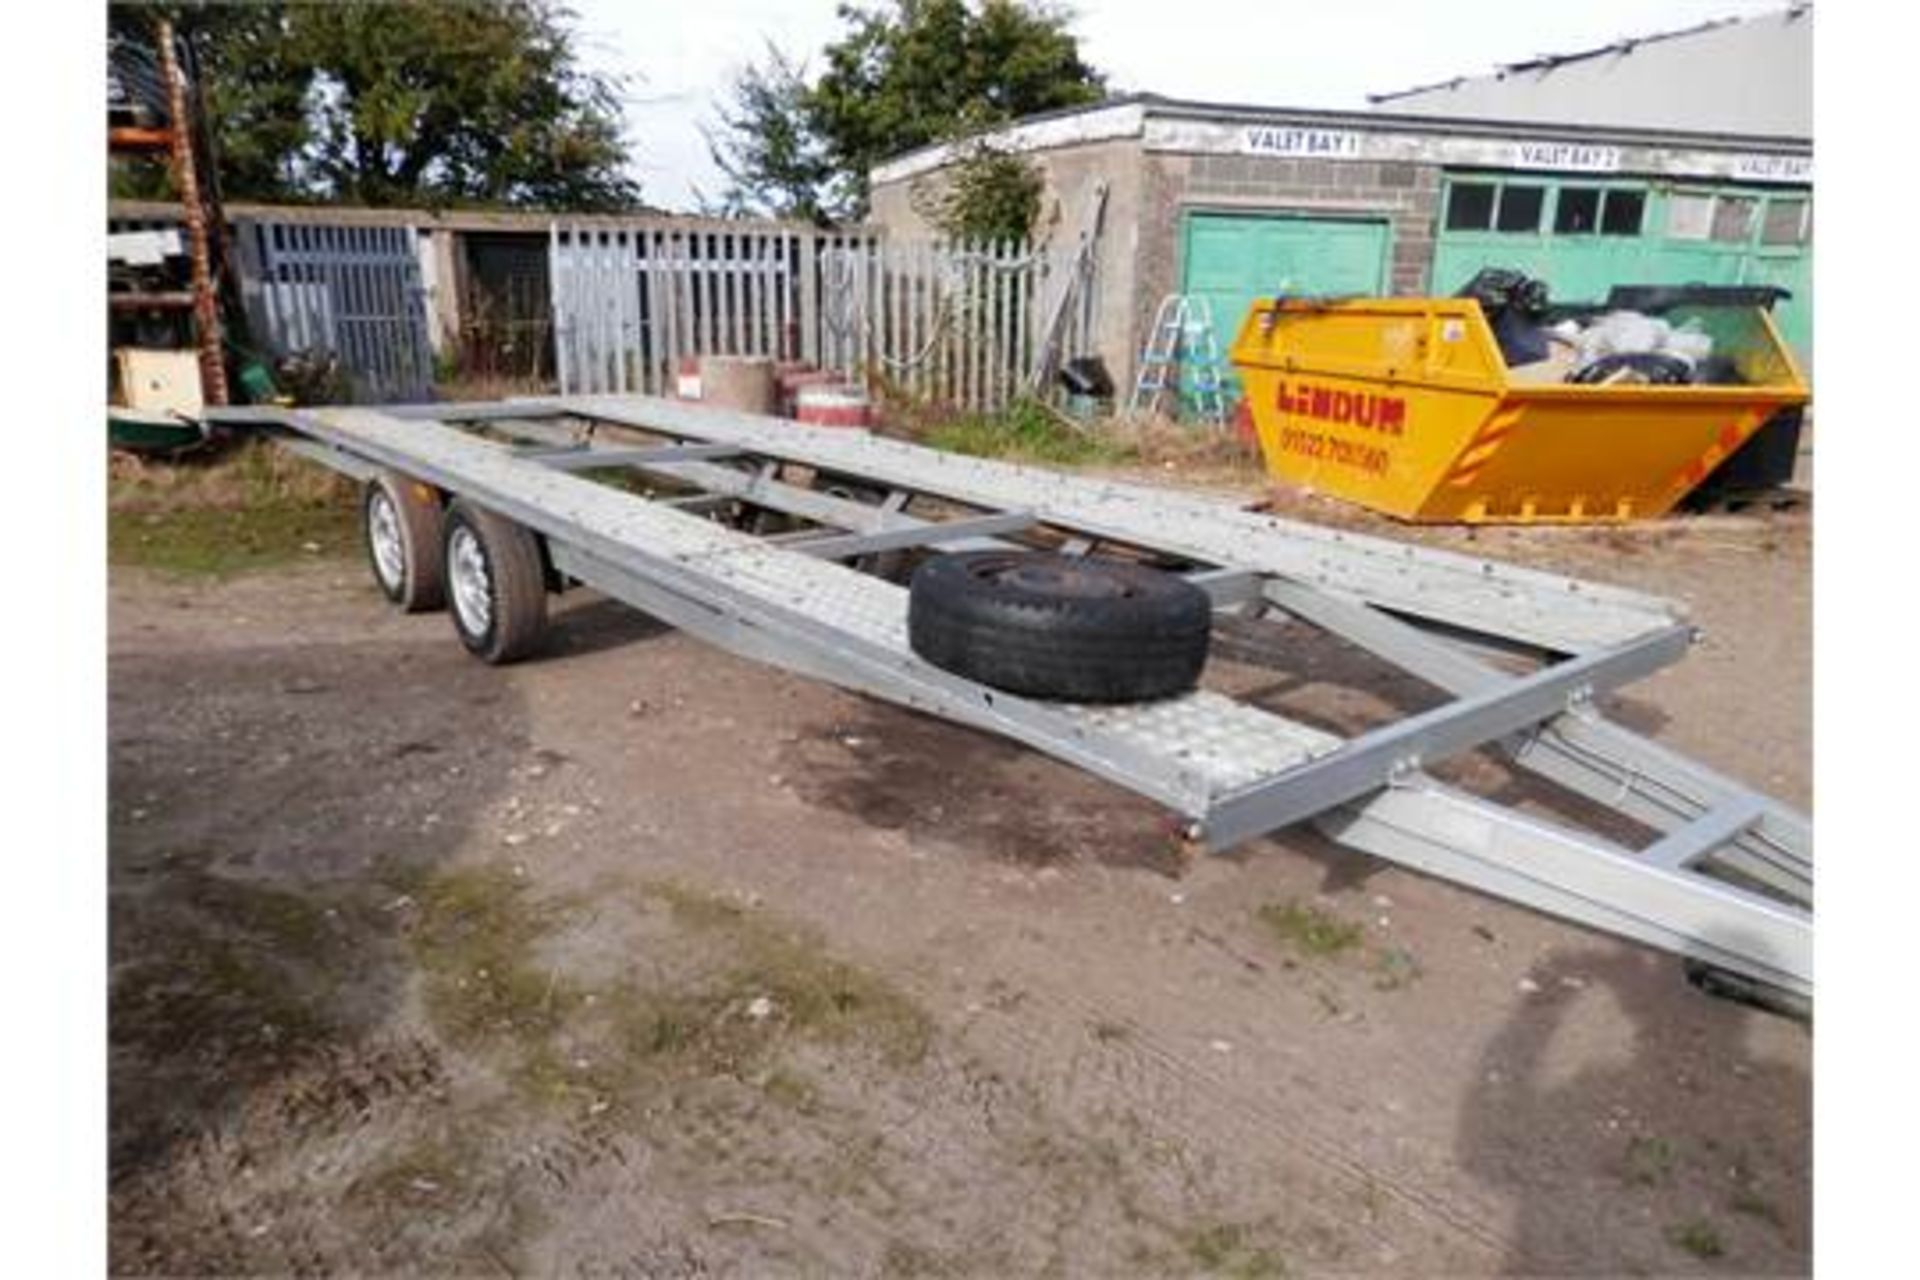 3400KG 2 CAR TRAILER, 2.5 TONNE CARRYING CAPACITY !! GOOD ALLOYS/TYRES & SPARE WHEEL. - Image 2 of 11